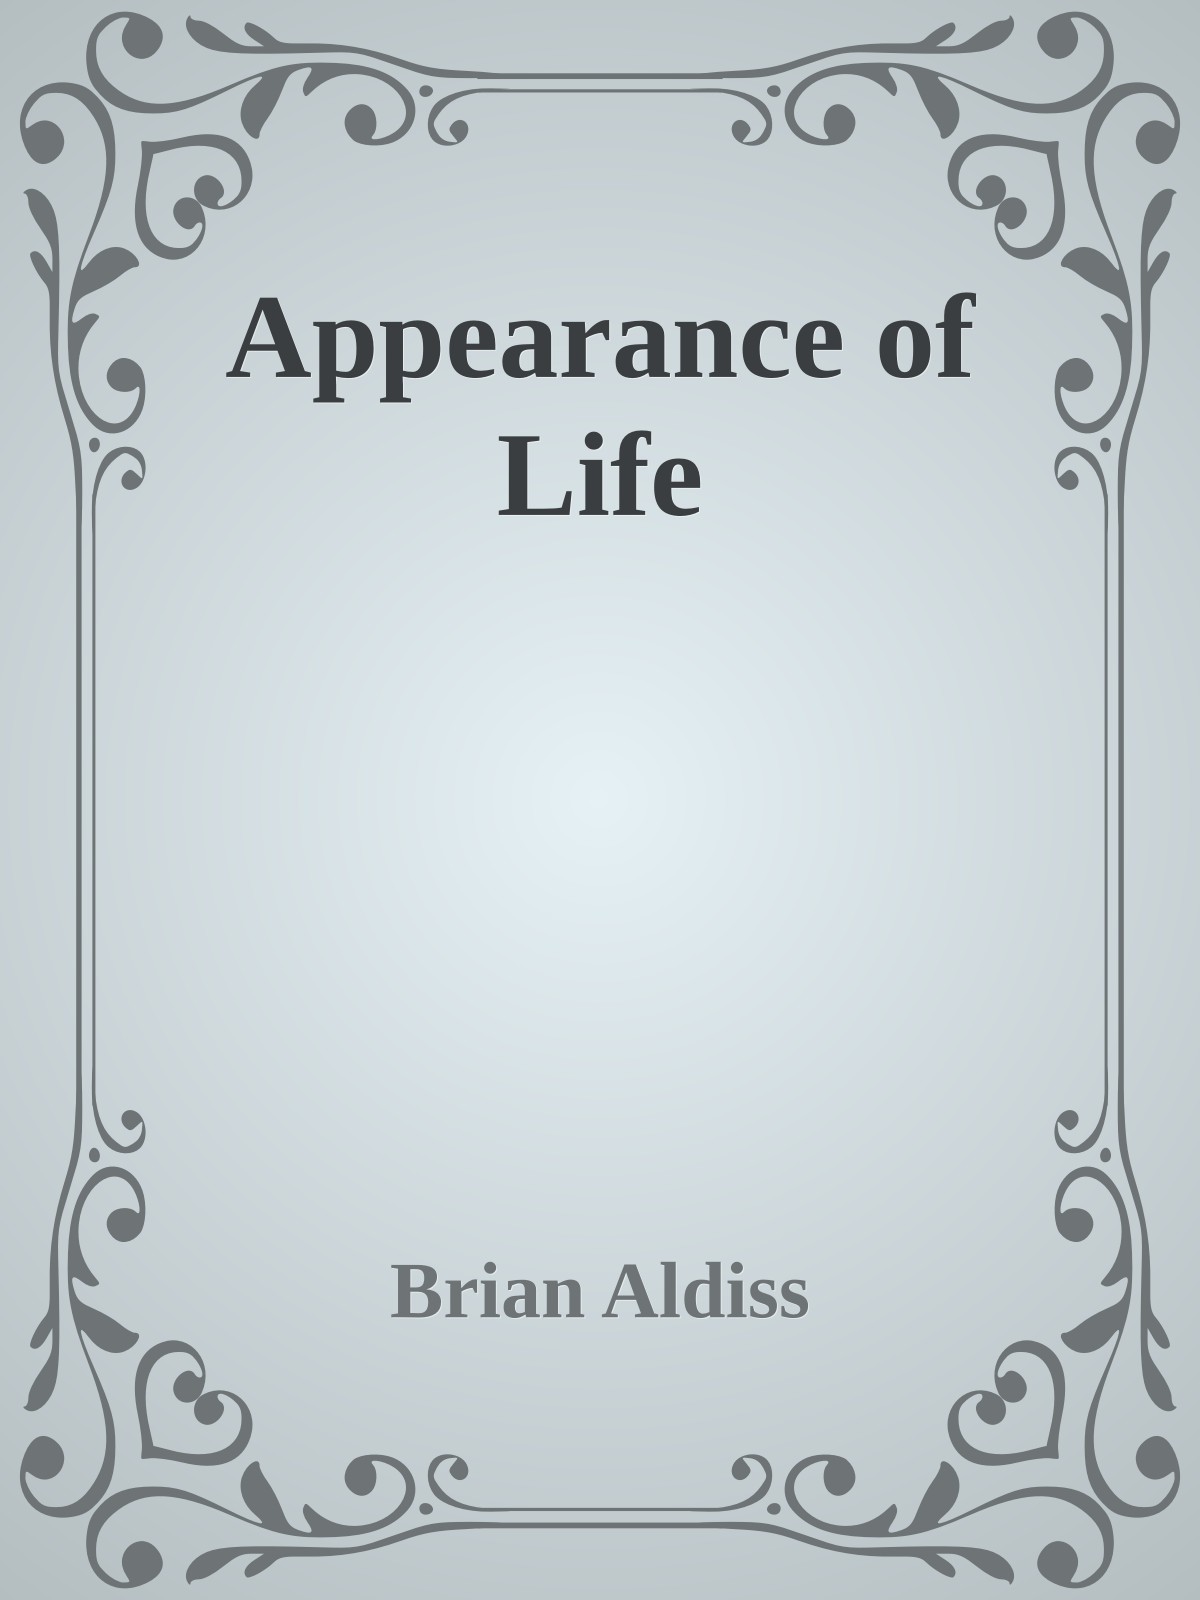 Appearance of Life